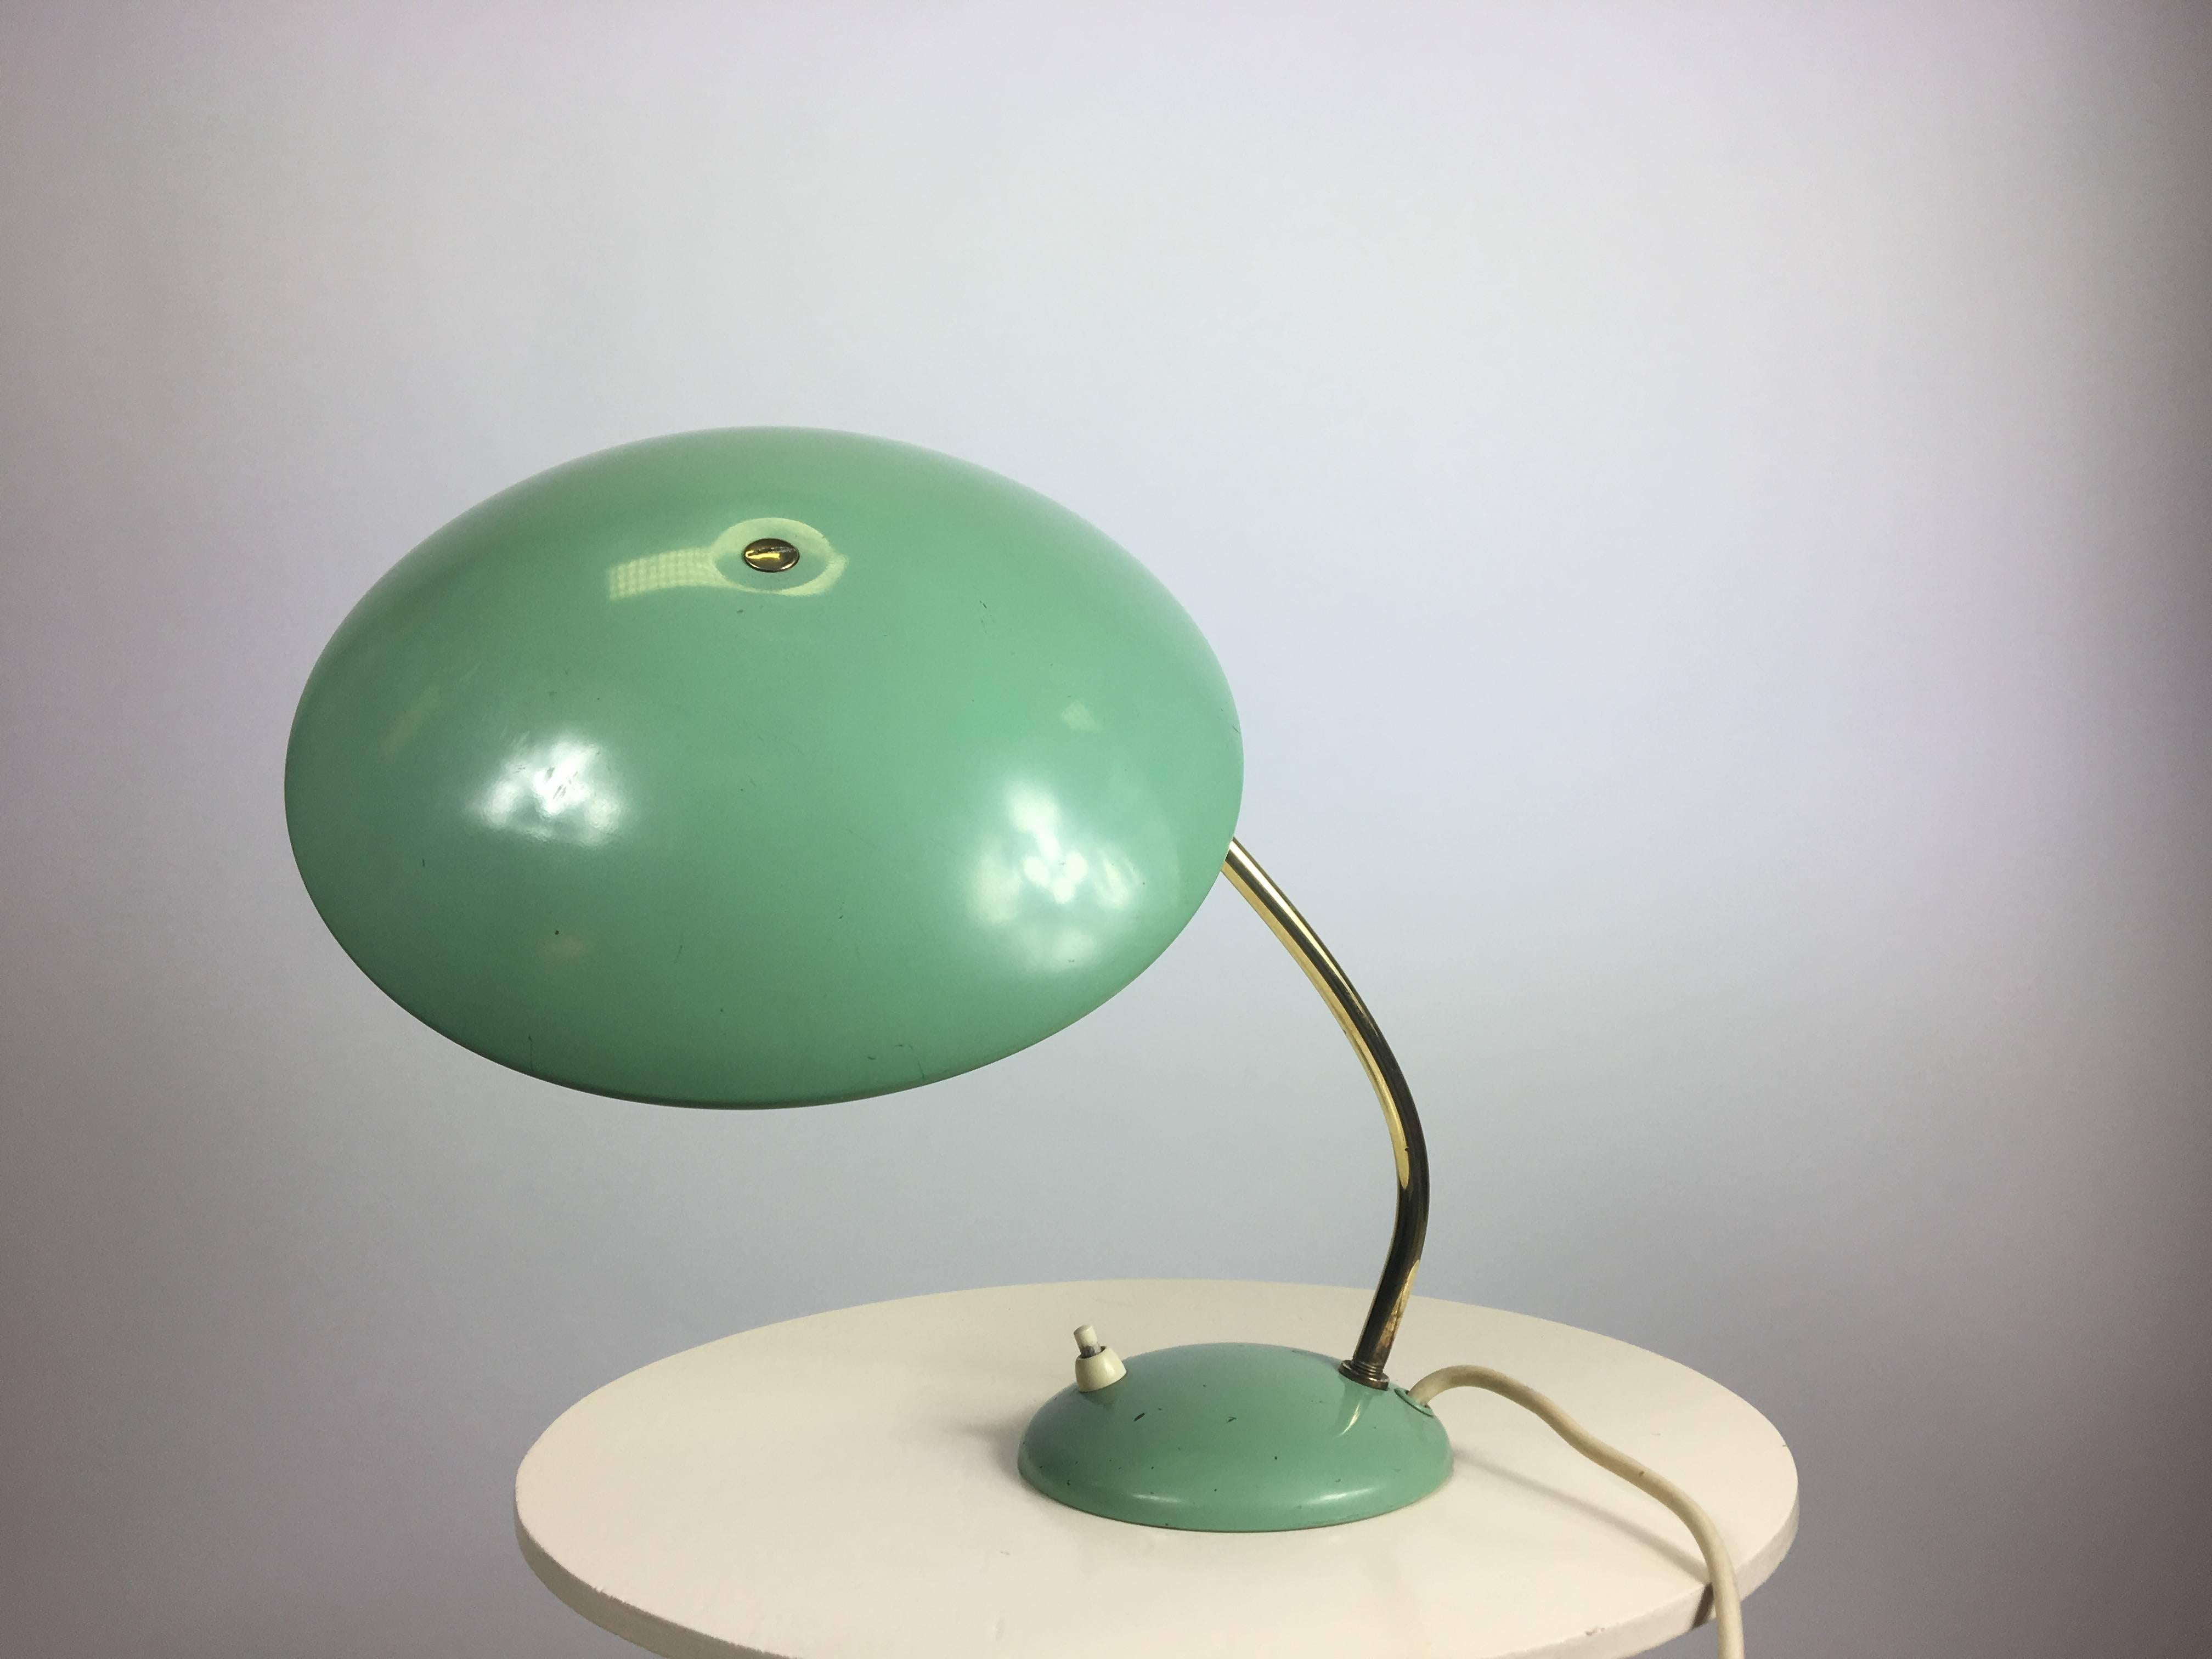 Petite-sized Philips desk lamp in mint green. 1950s  produced by Philips Eindhoven.
The hood is hinged so it can turn .